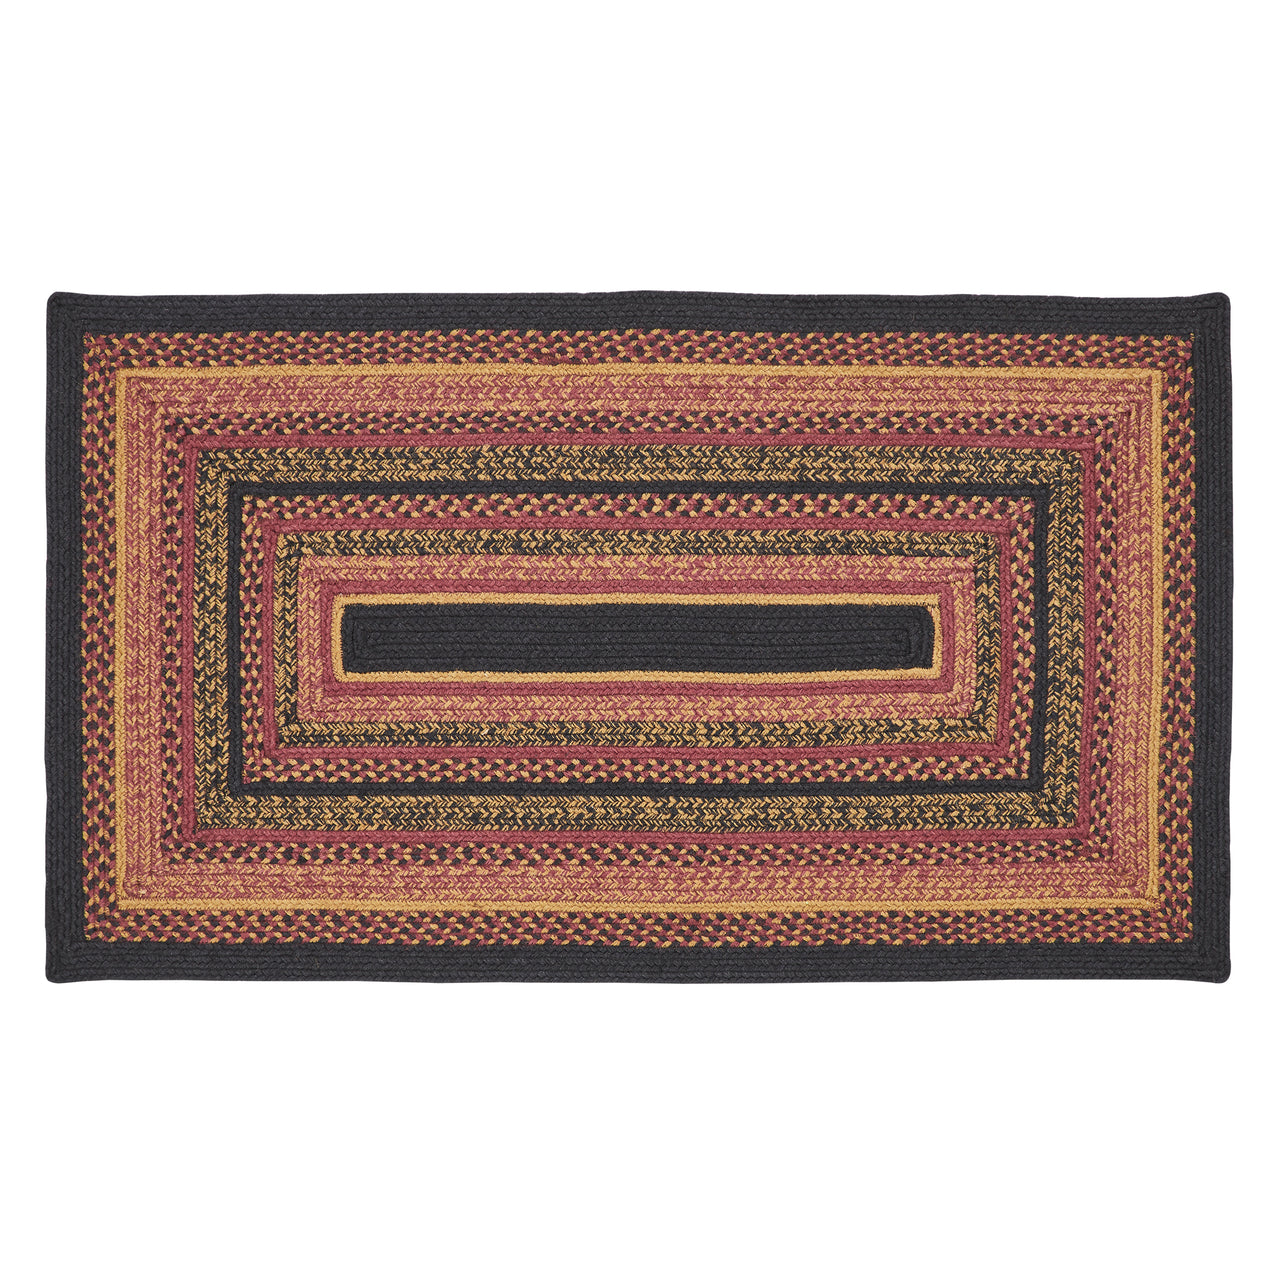 Heritage Farms Jute Braided Rug Rect. with Rug Pad 27"x48" VHC Brands